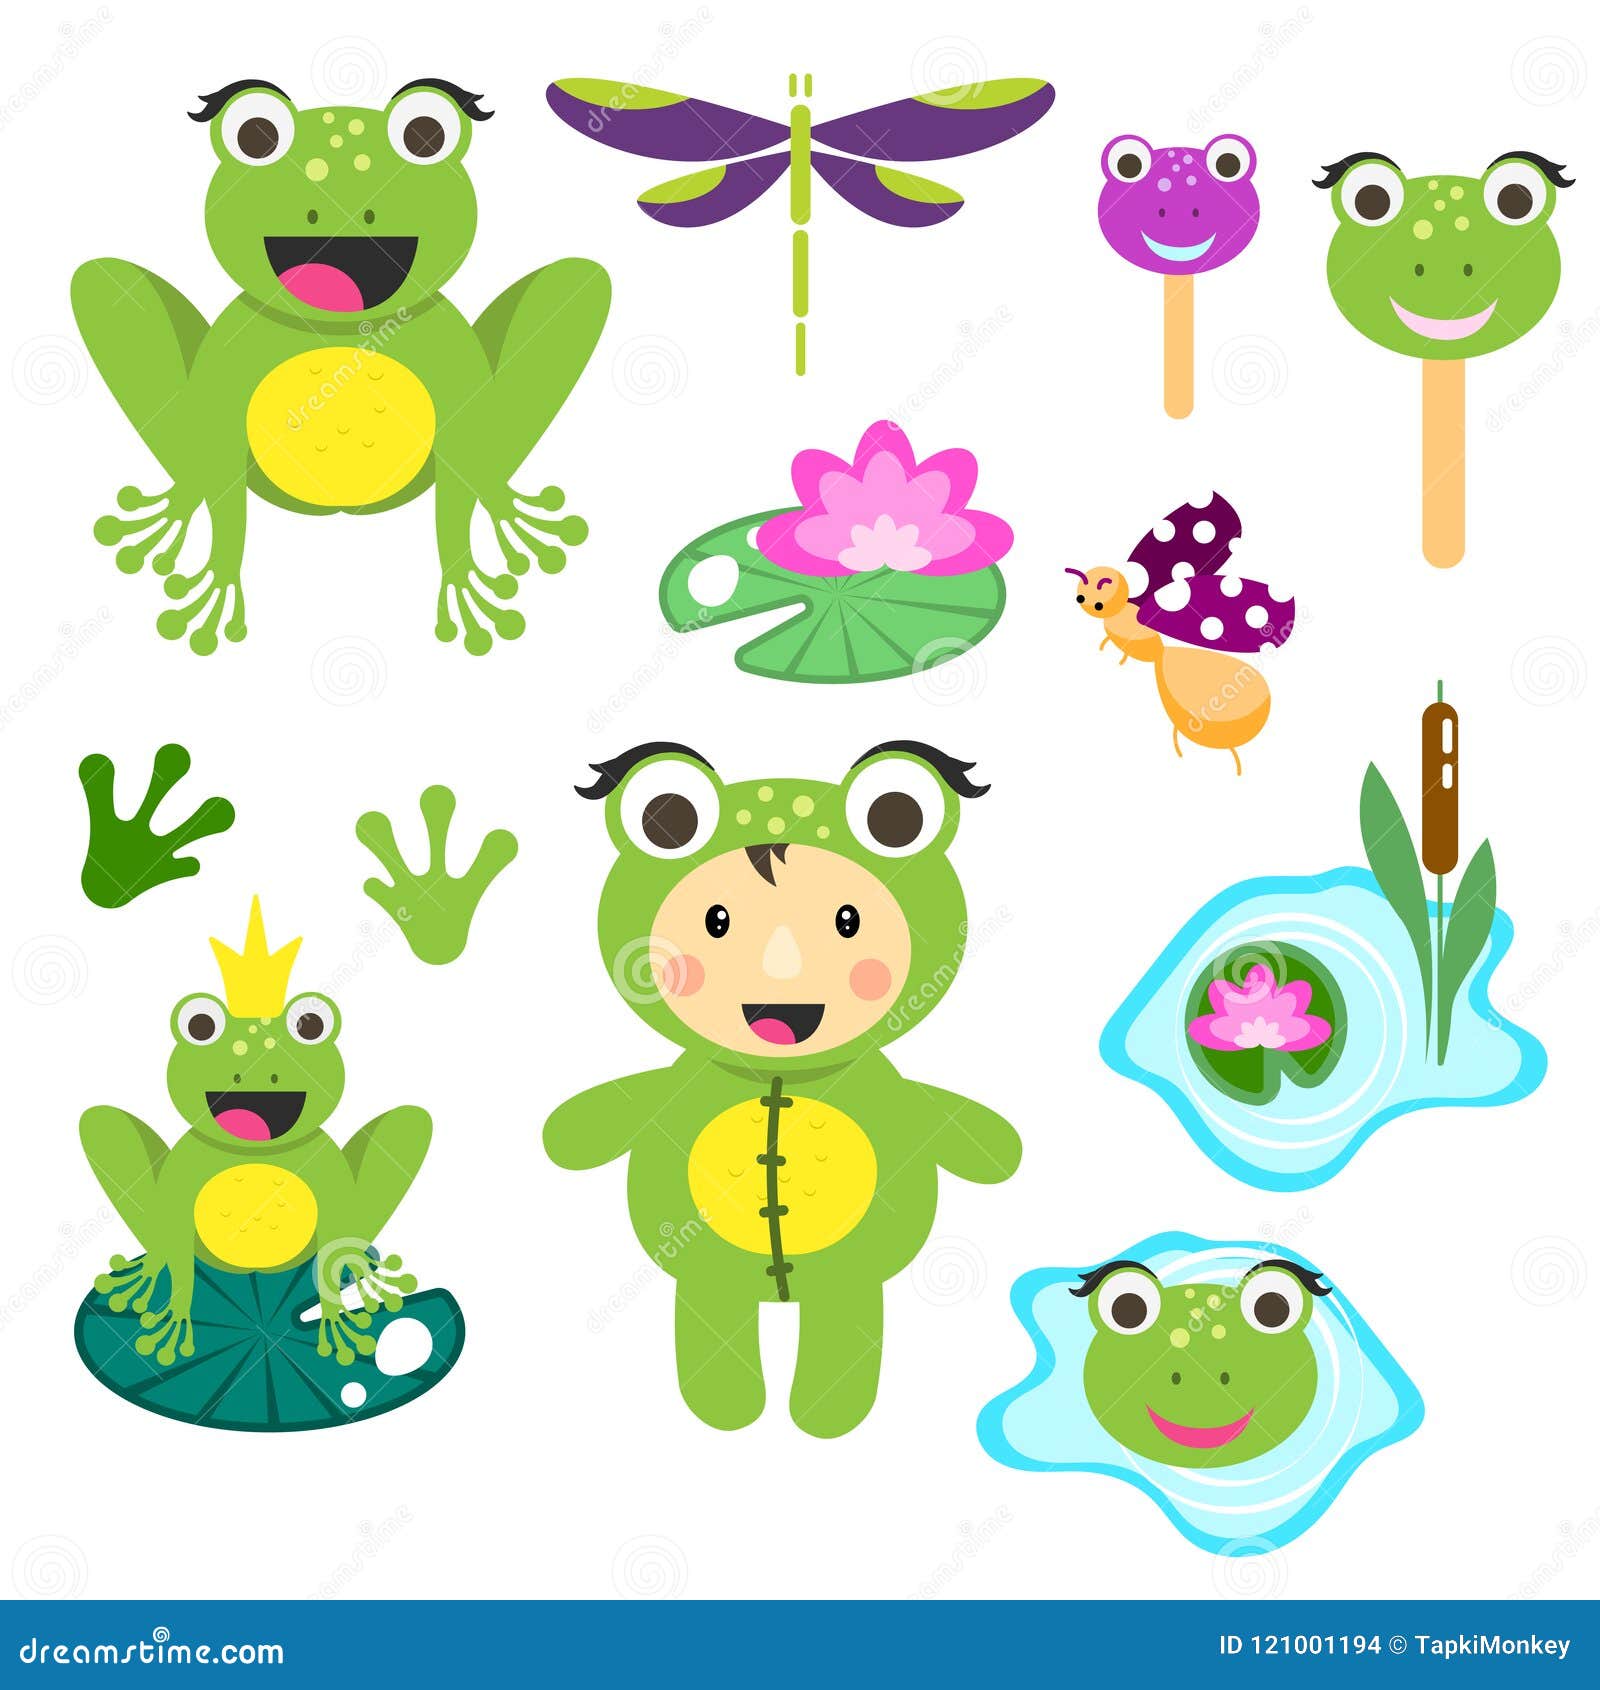 Cute Cartoon Frog Clipart Set. Funny Frogs Illustration for ...